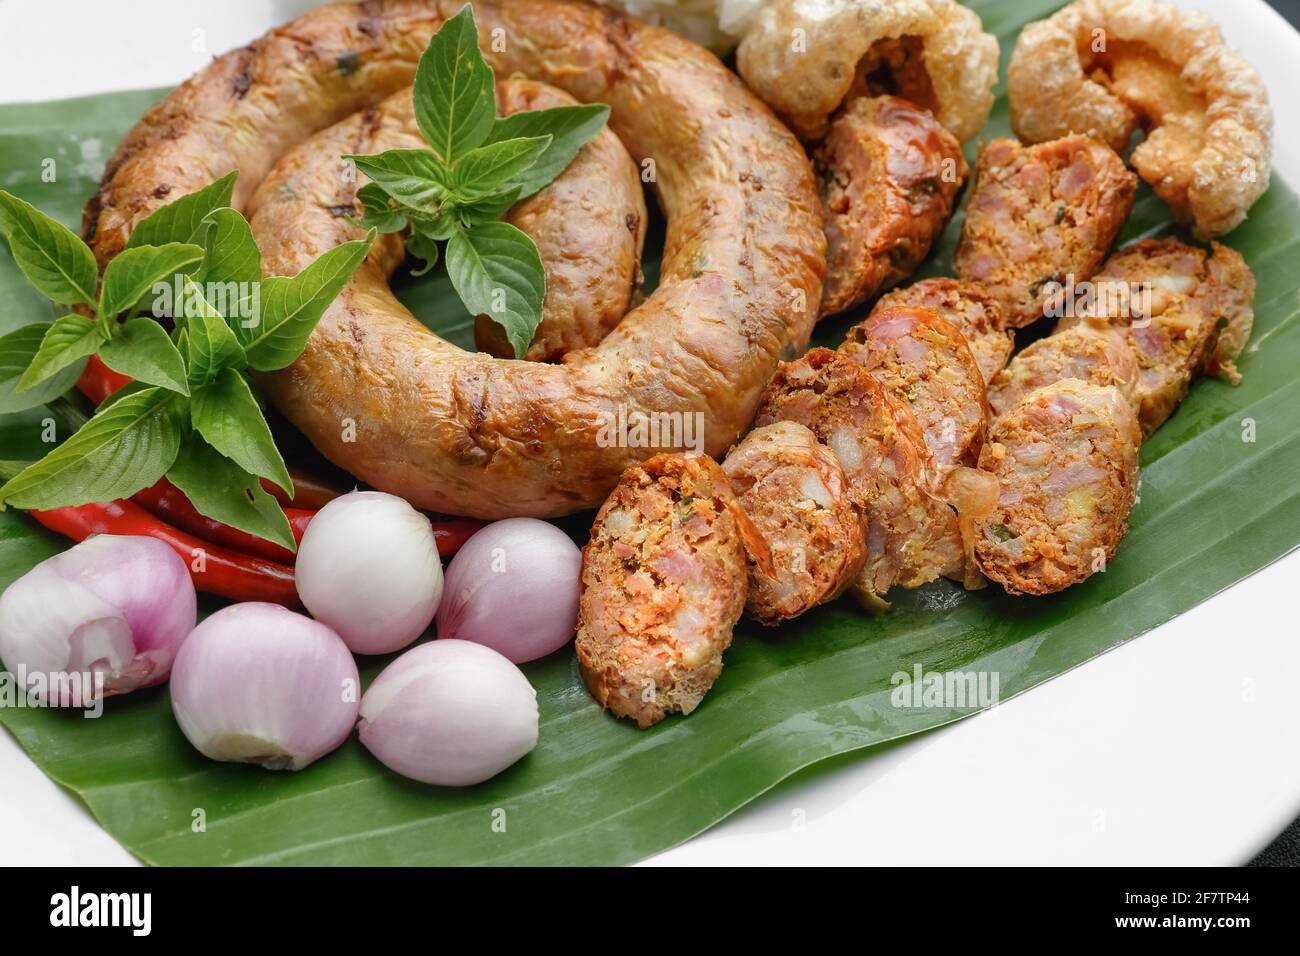 Northern Thai Sausage or Sai-Aua , filled with chopped lemongrass, galangal, kaffir lime, coriander and red curry paste. Stock Photo